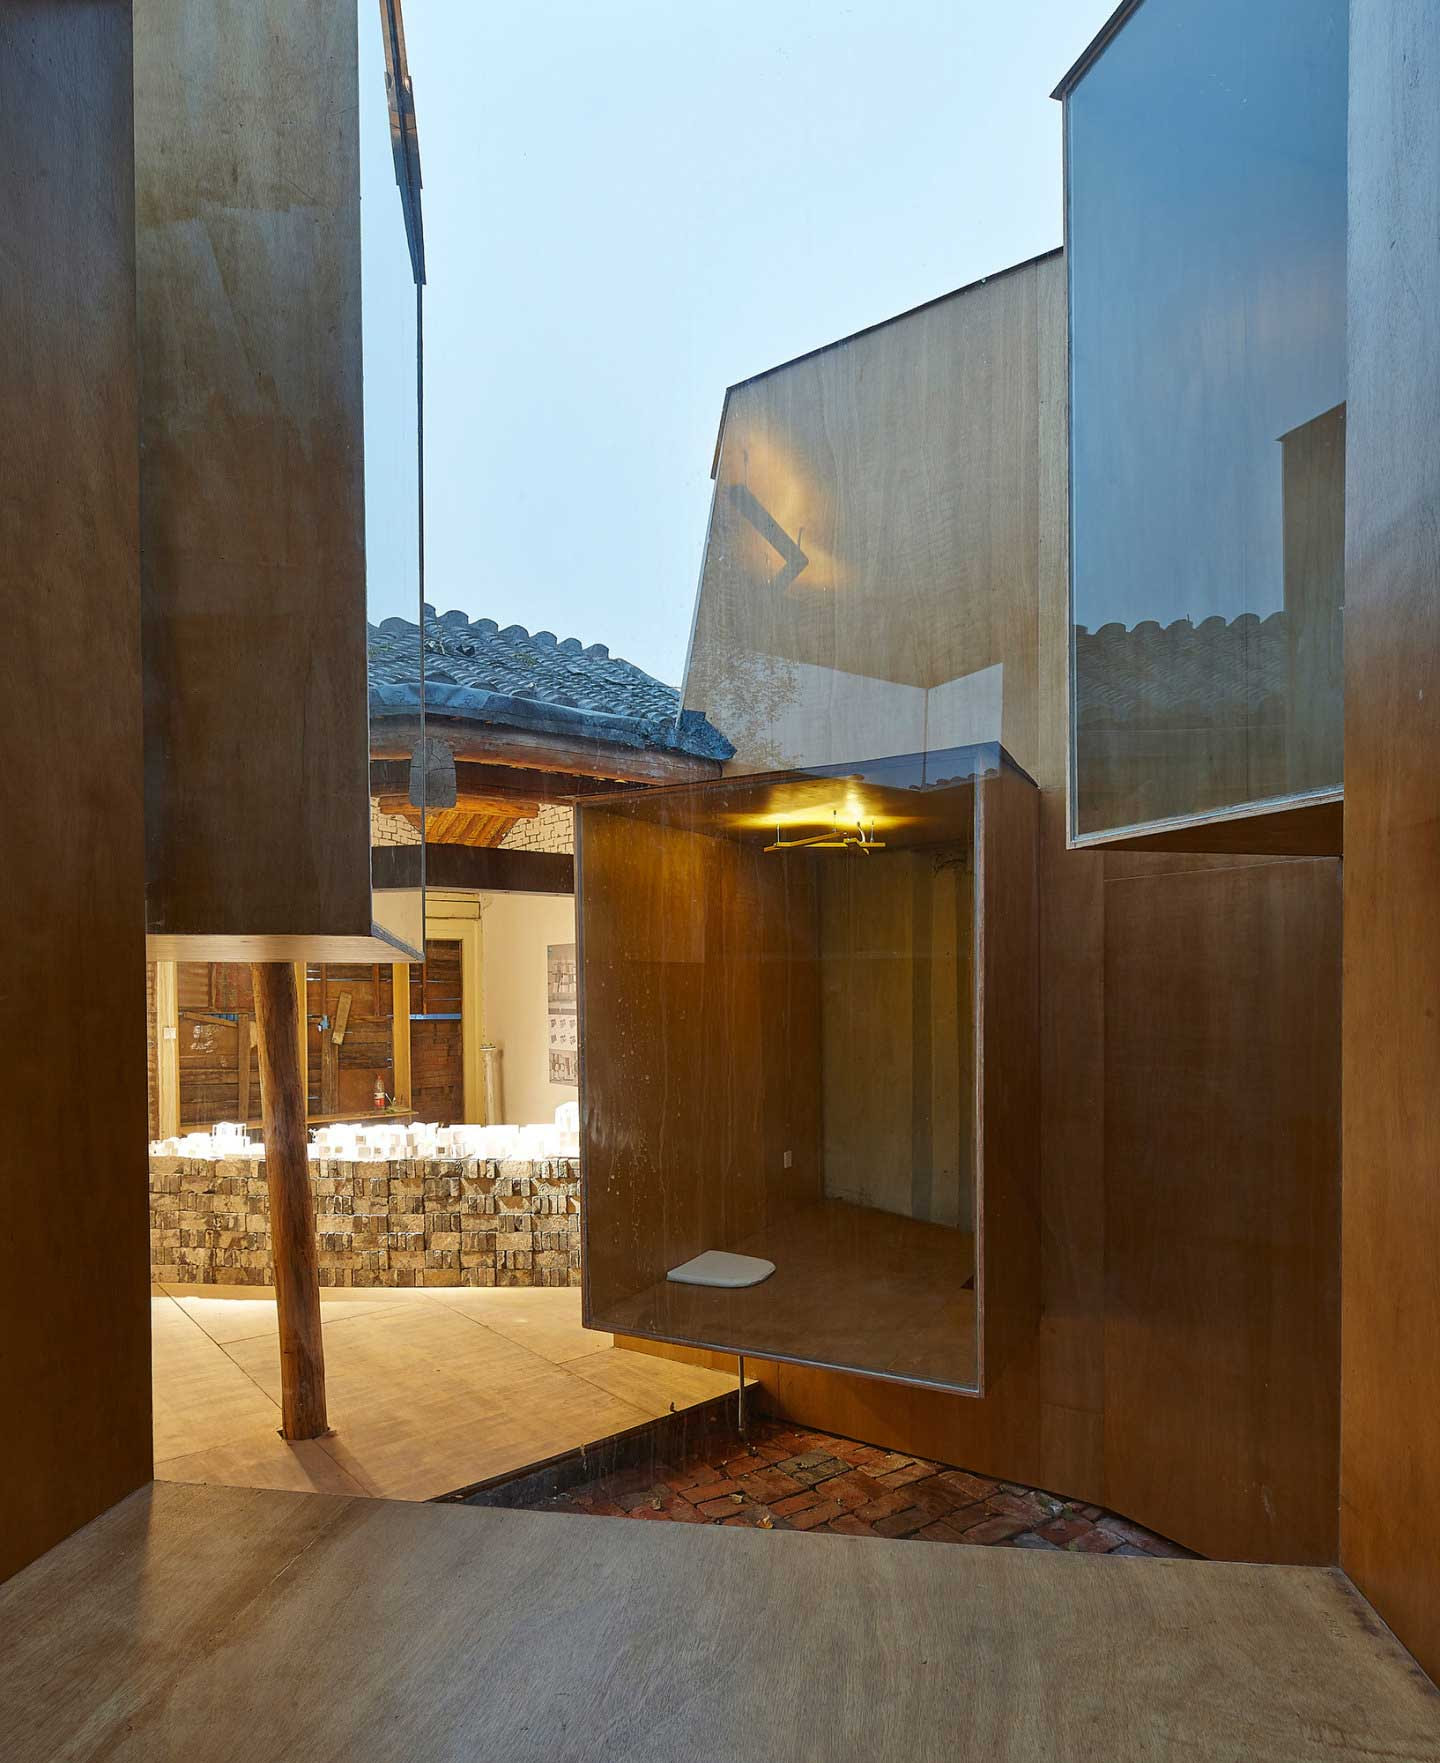 Micro-Housing: Hutong Experiments by Standardarchitecture. Photo by Su Shengliang | Yellowtrace